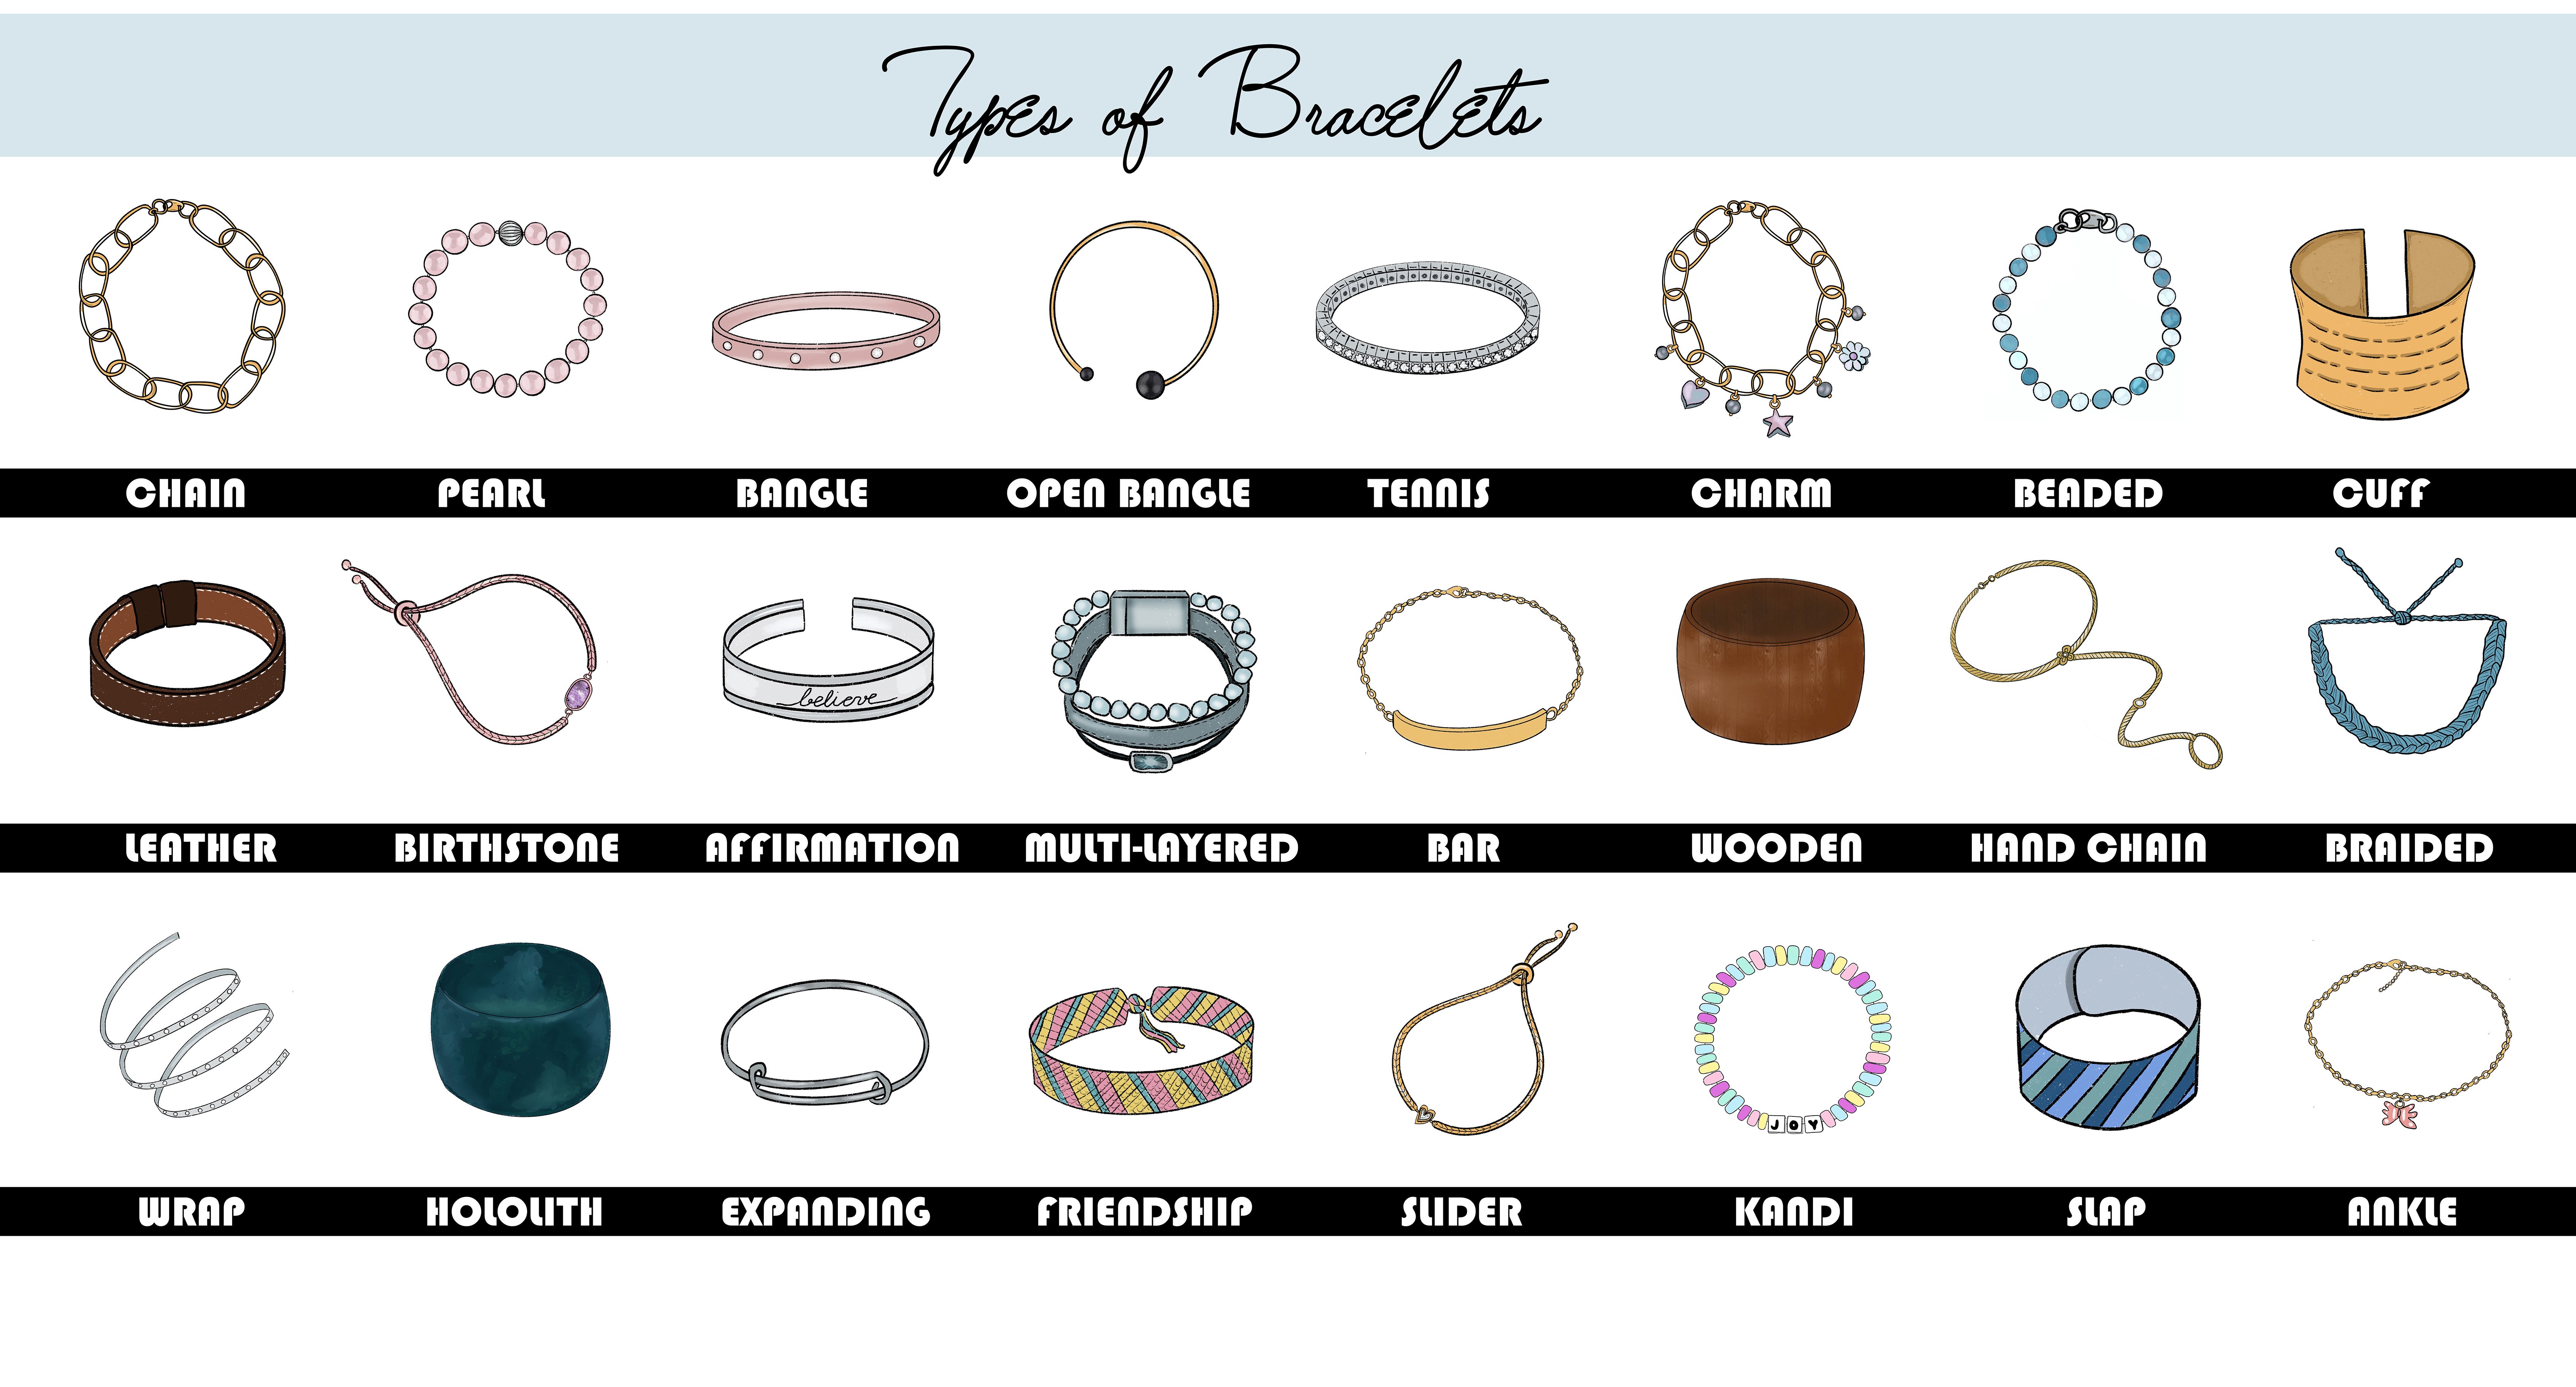 Your Ultimate Guide on the Different Types of Bracelets - TPS Blog